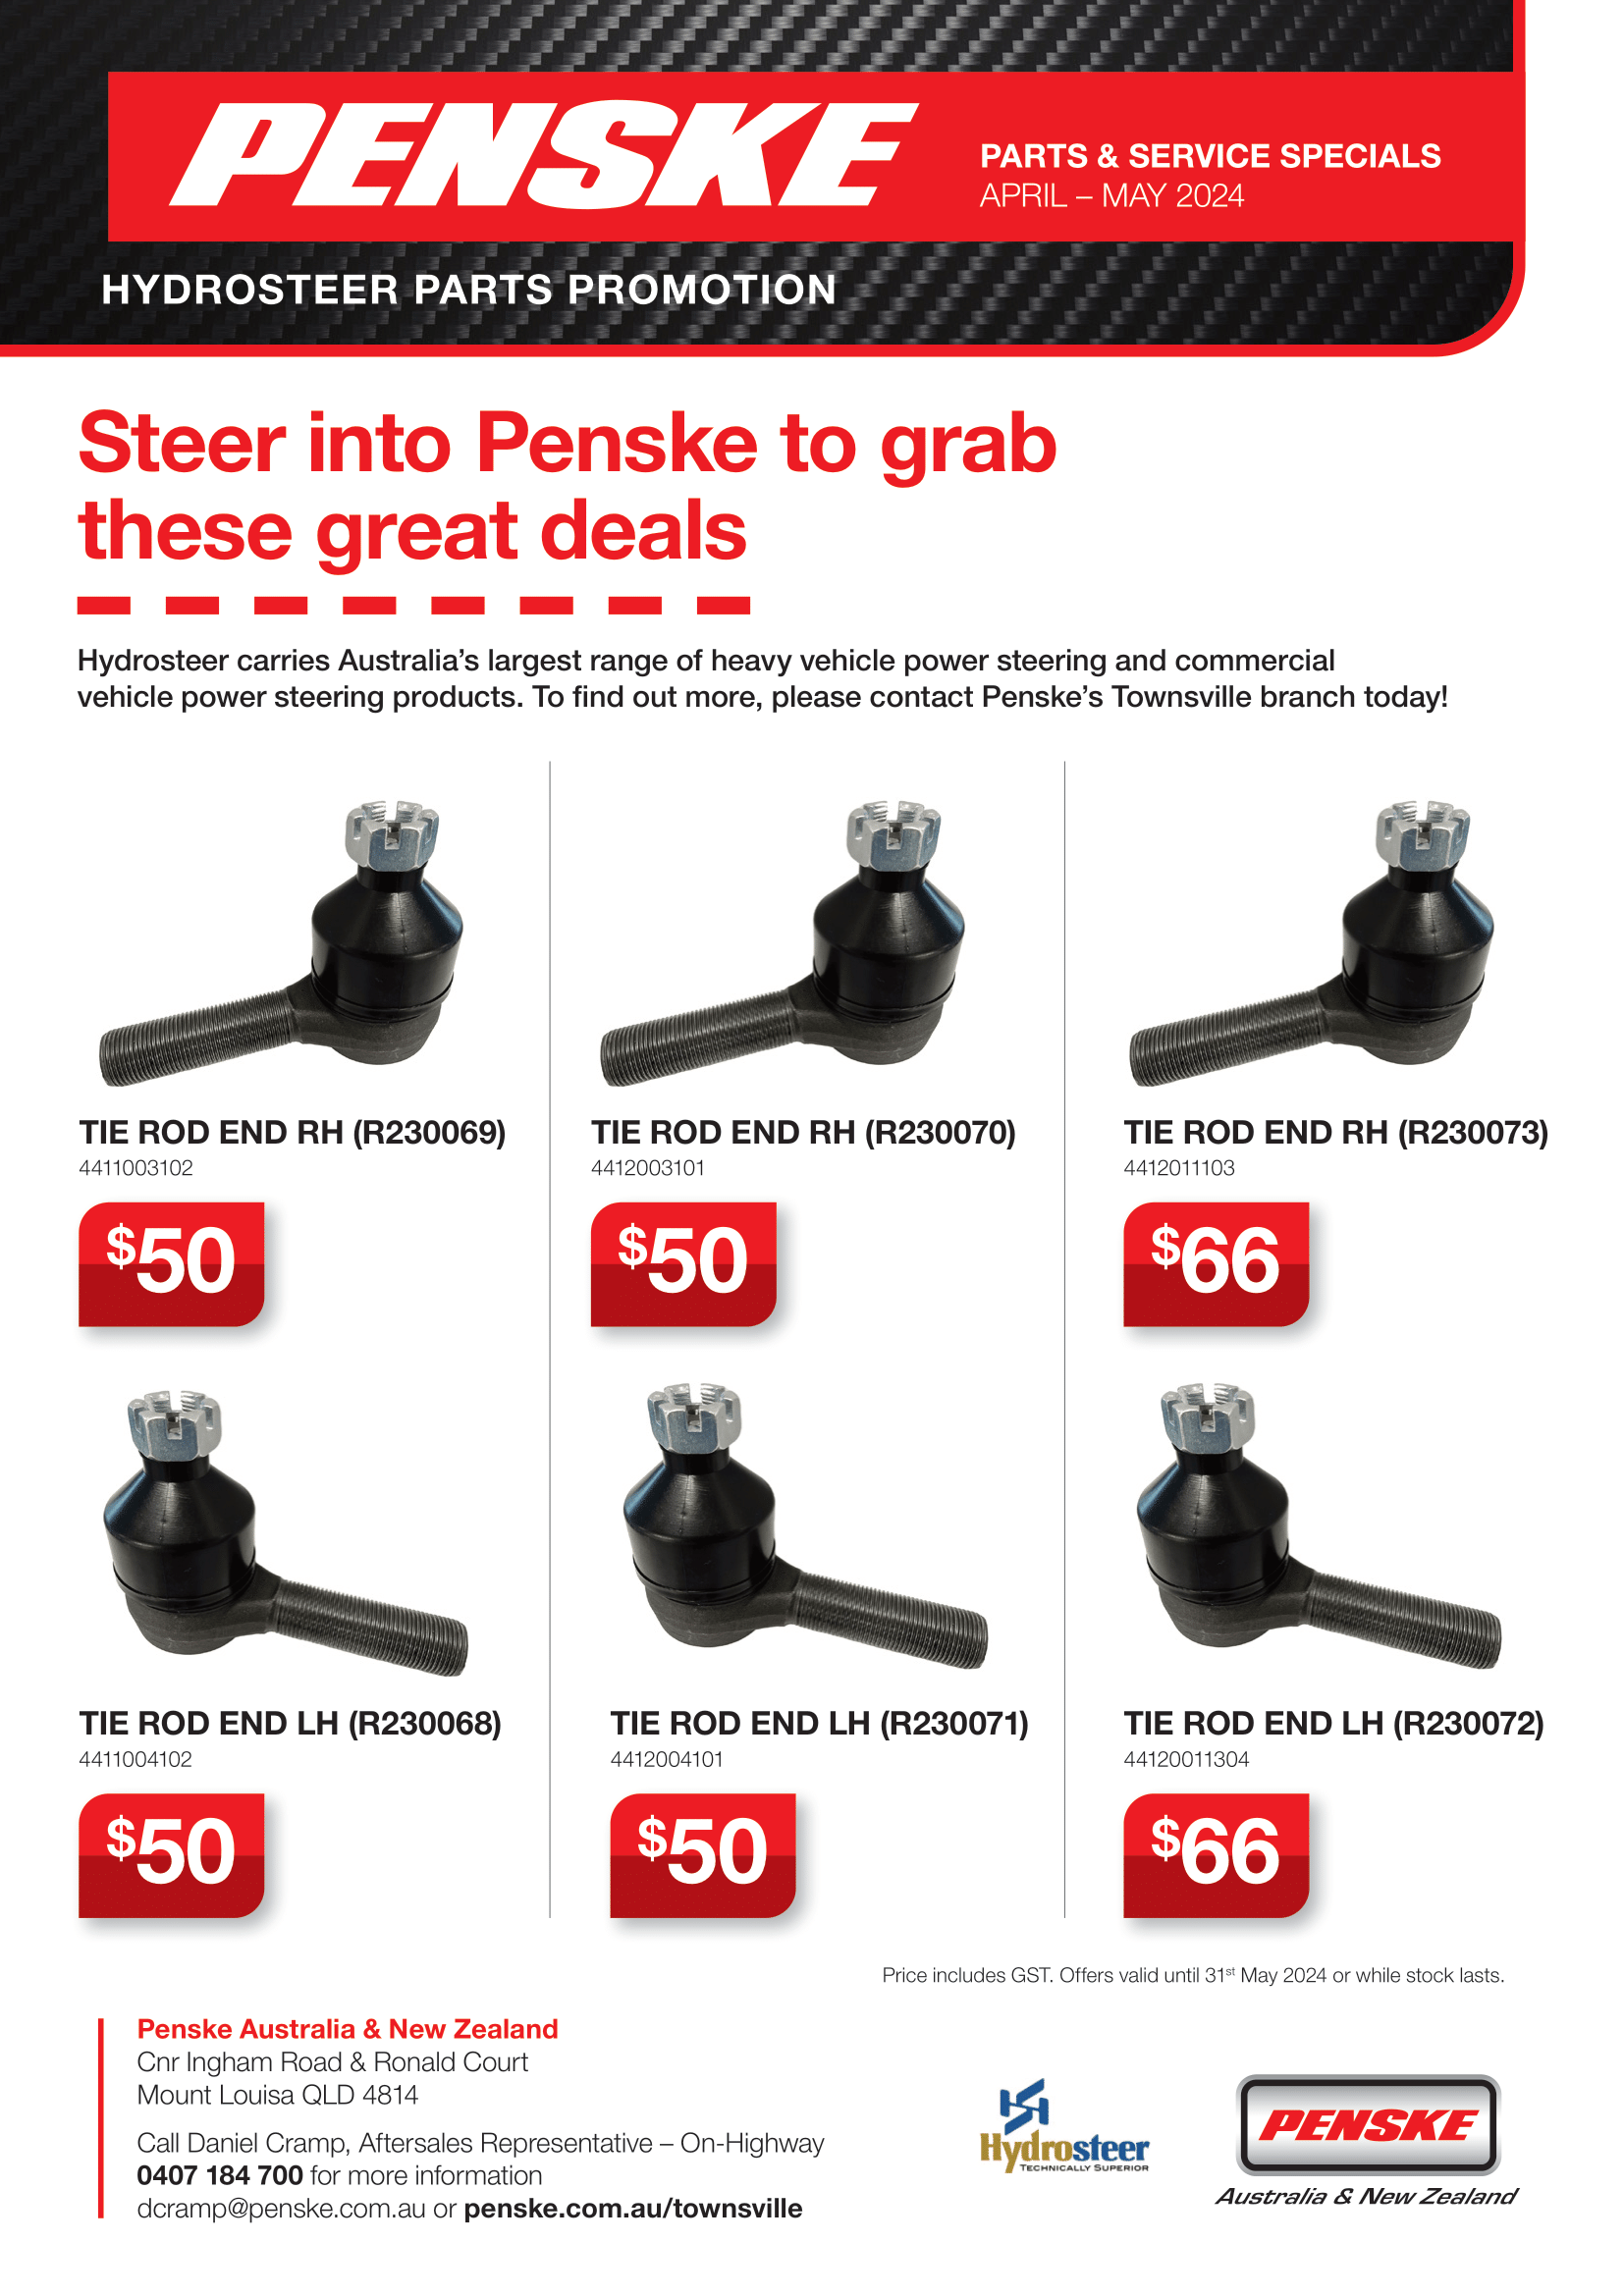 Hydrosteer Parts Promotion